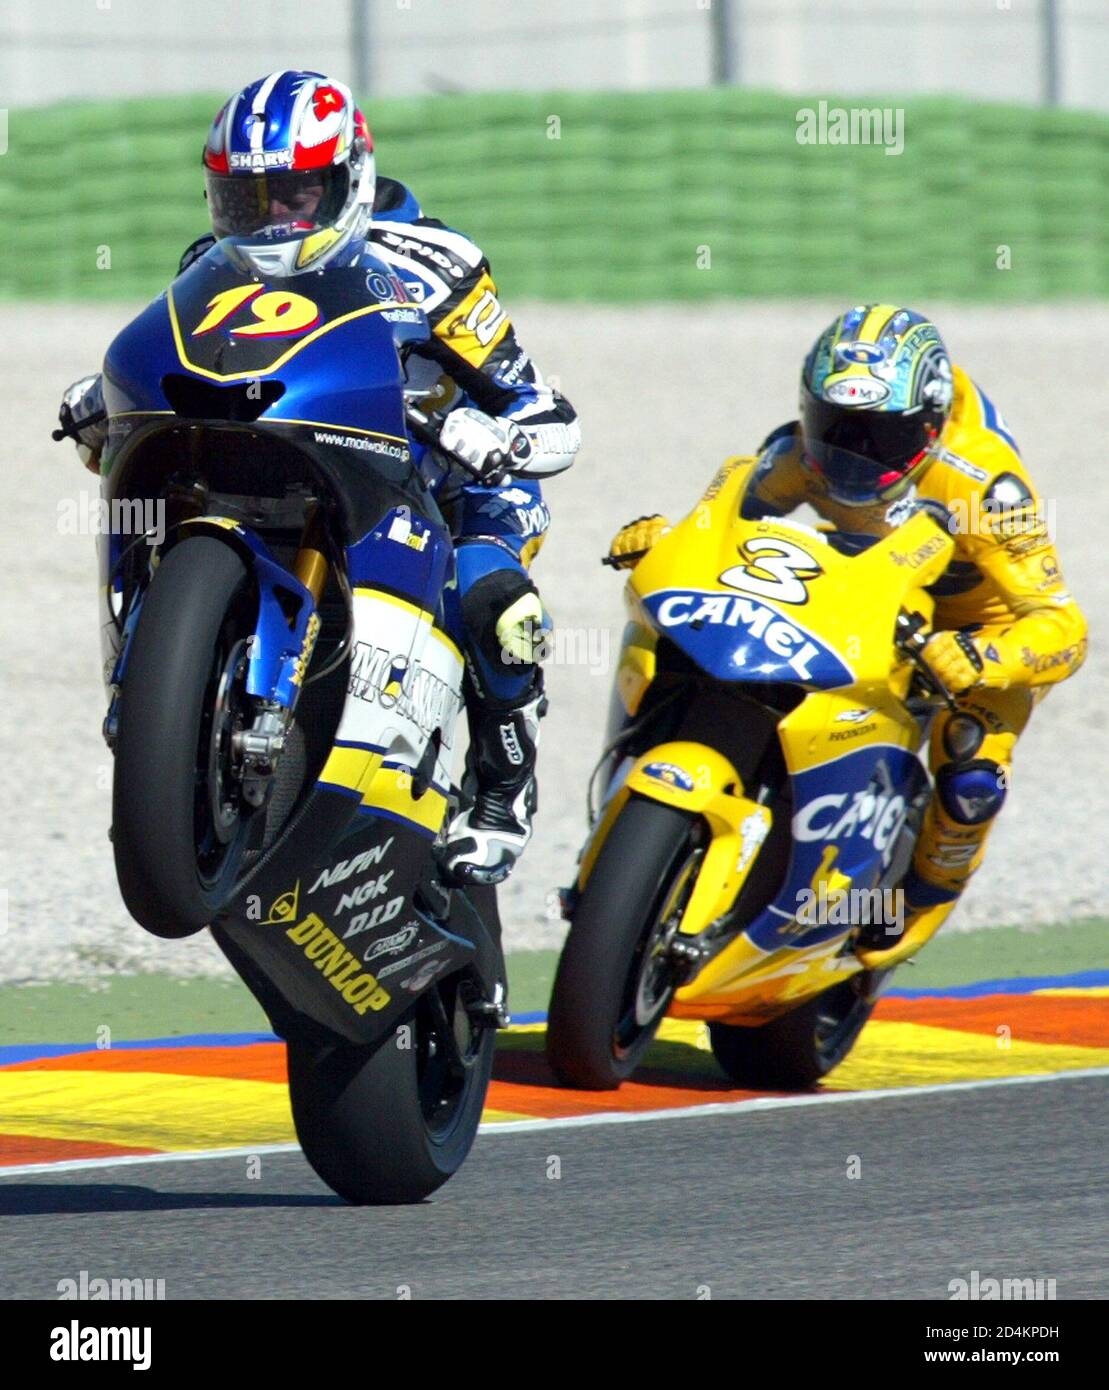 French Moto GP rider Olivier Jacque performs a wheel stand followed by  Italian Max Biaggi during qualifying practice at Valencia Motorcycle Grand  Prix. French Moto GP rider Olivier Jacque performs a wheel